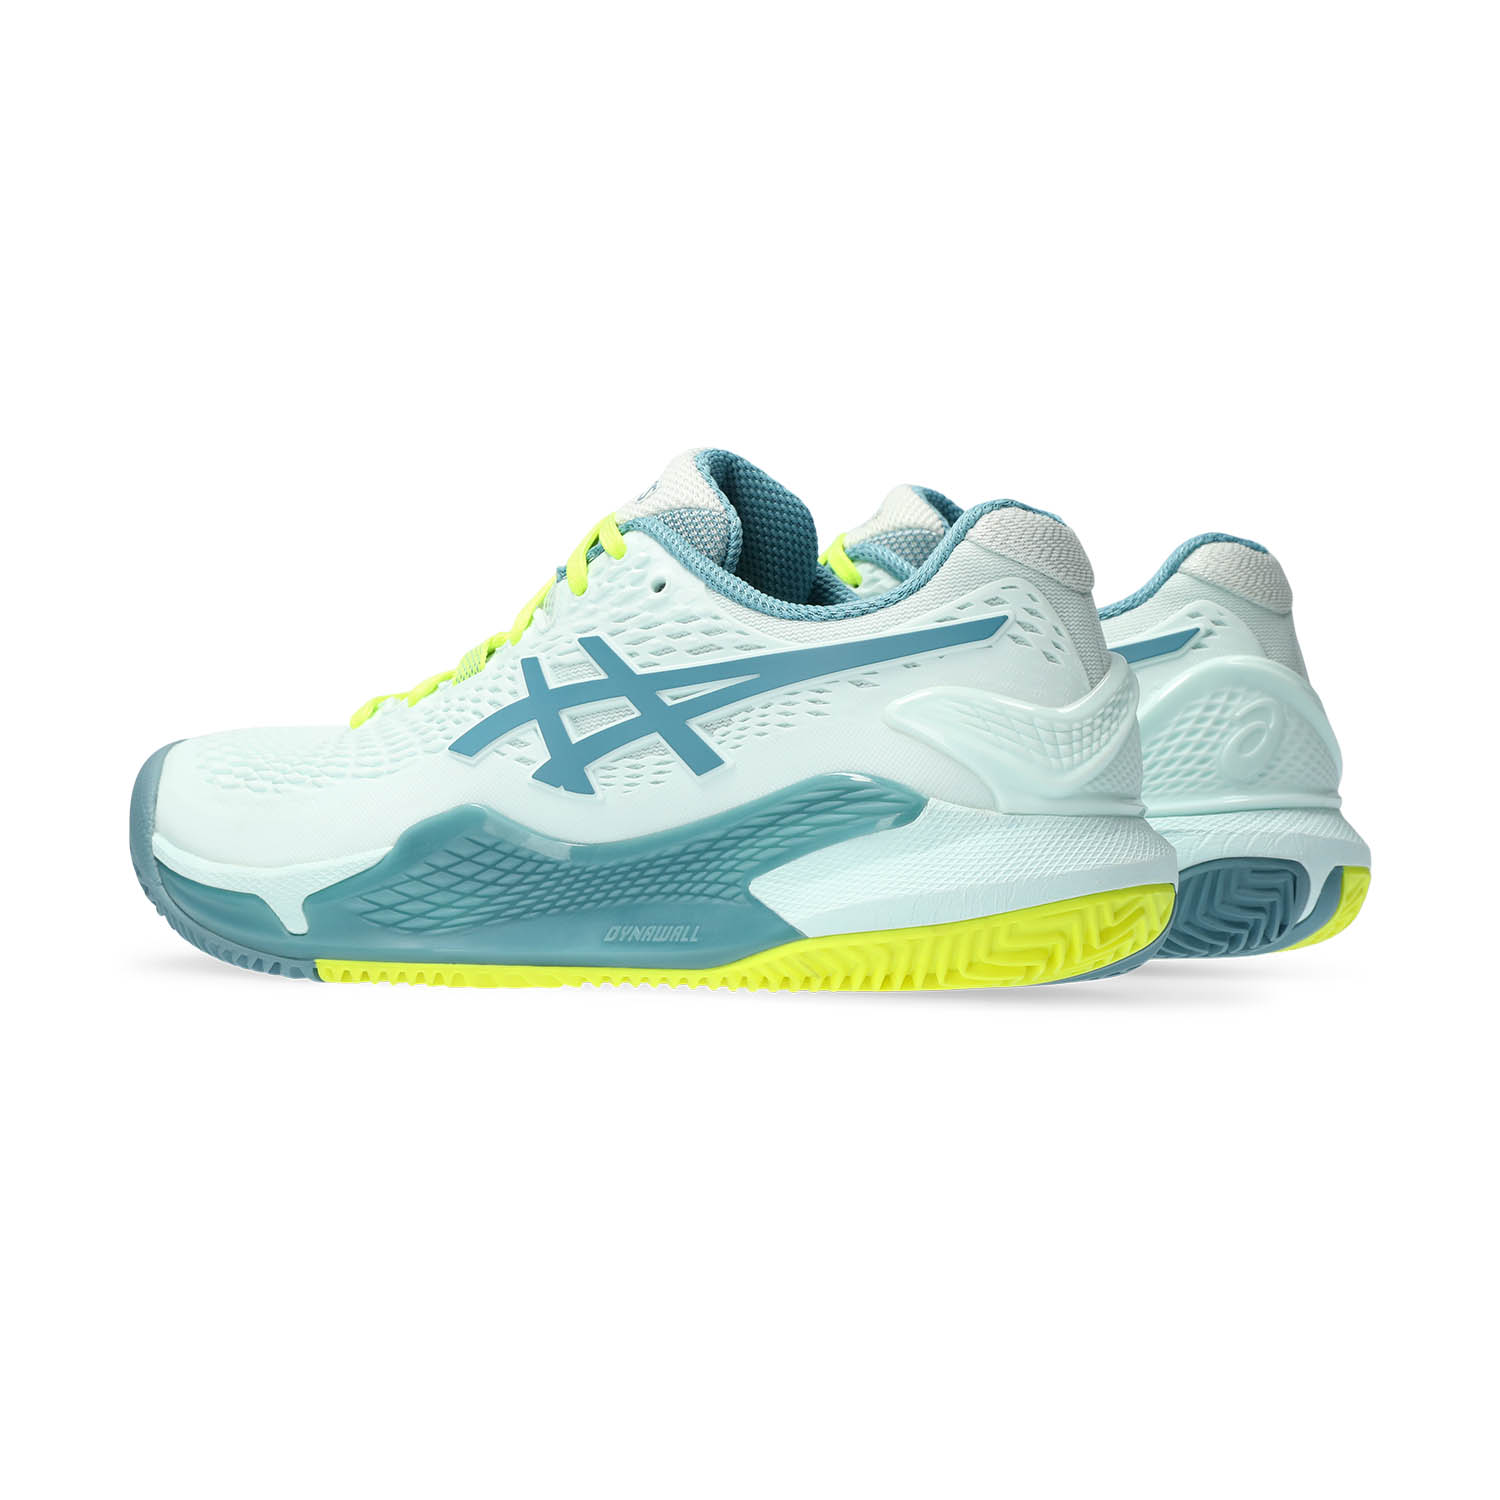 Asics Gel Resolution 9 Clay - Soothing Sea/Gris Blue